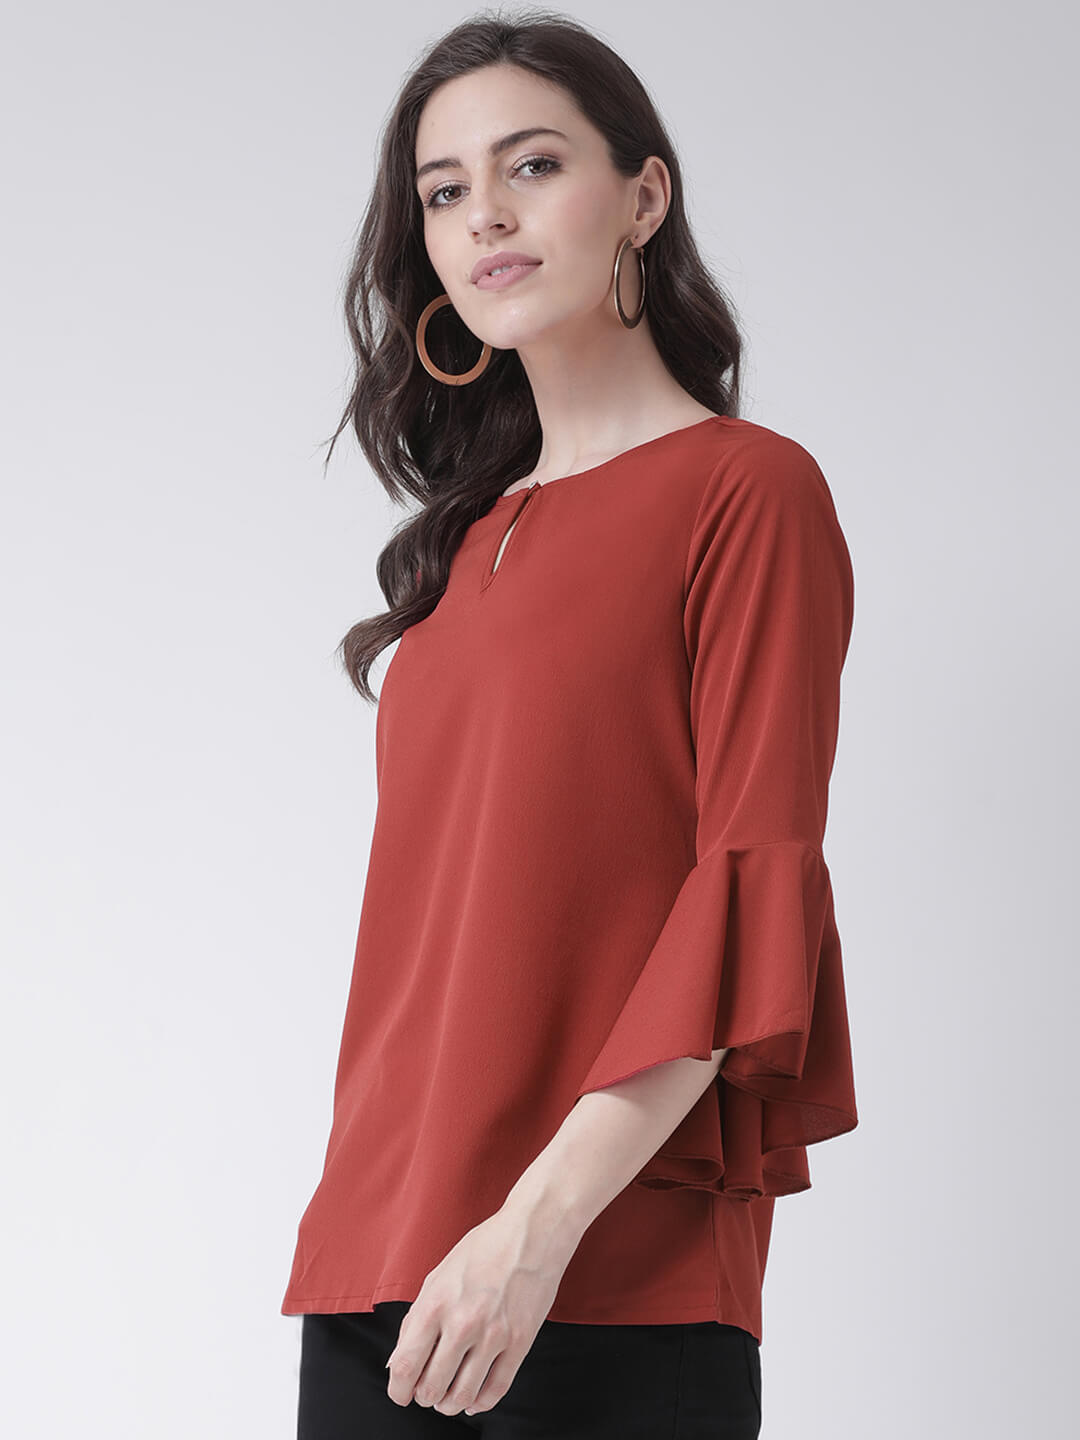 Women'S Solid Top With Round Neck And Flared Sleeves